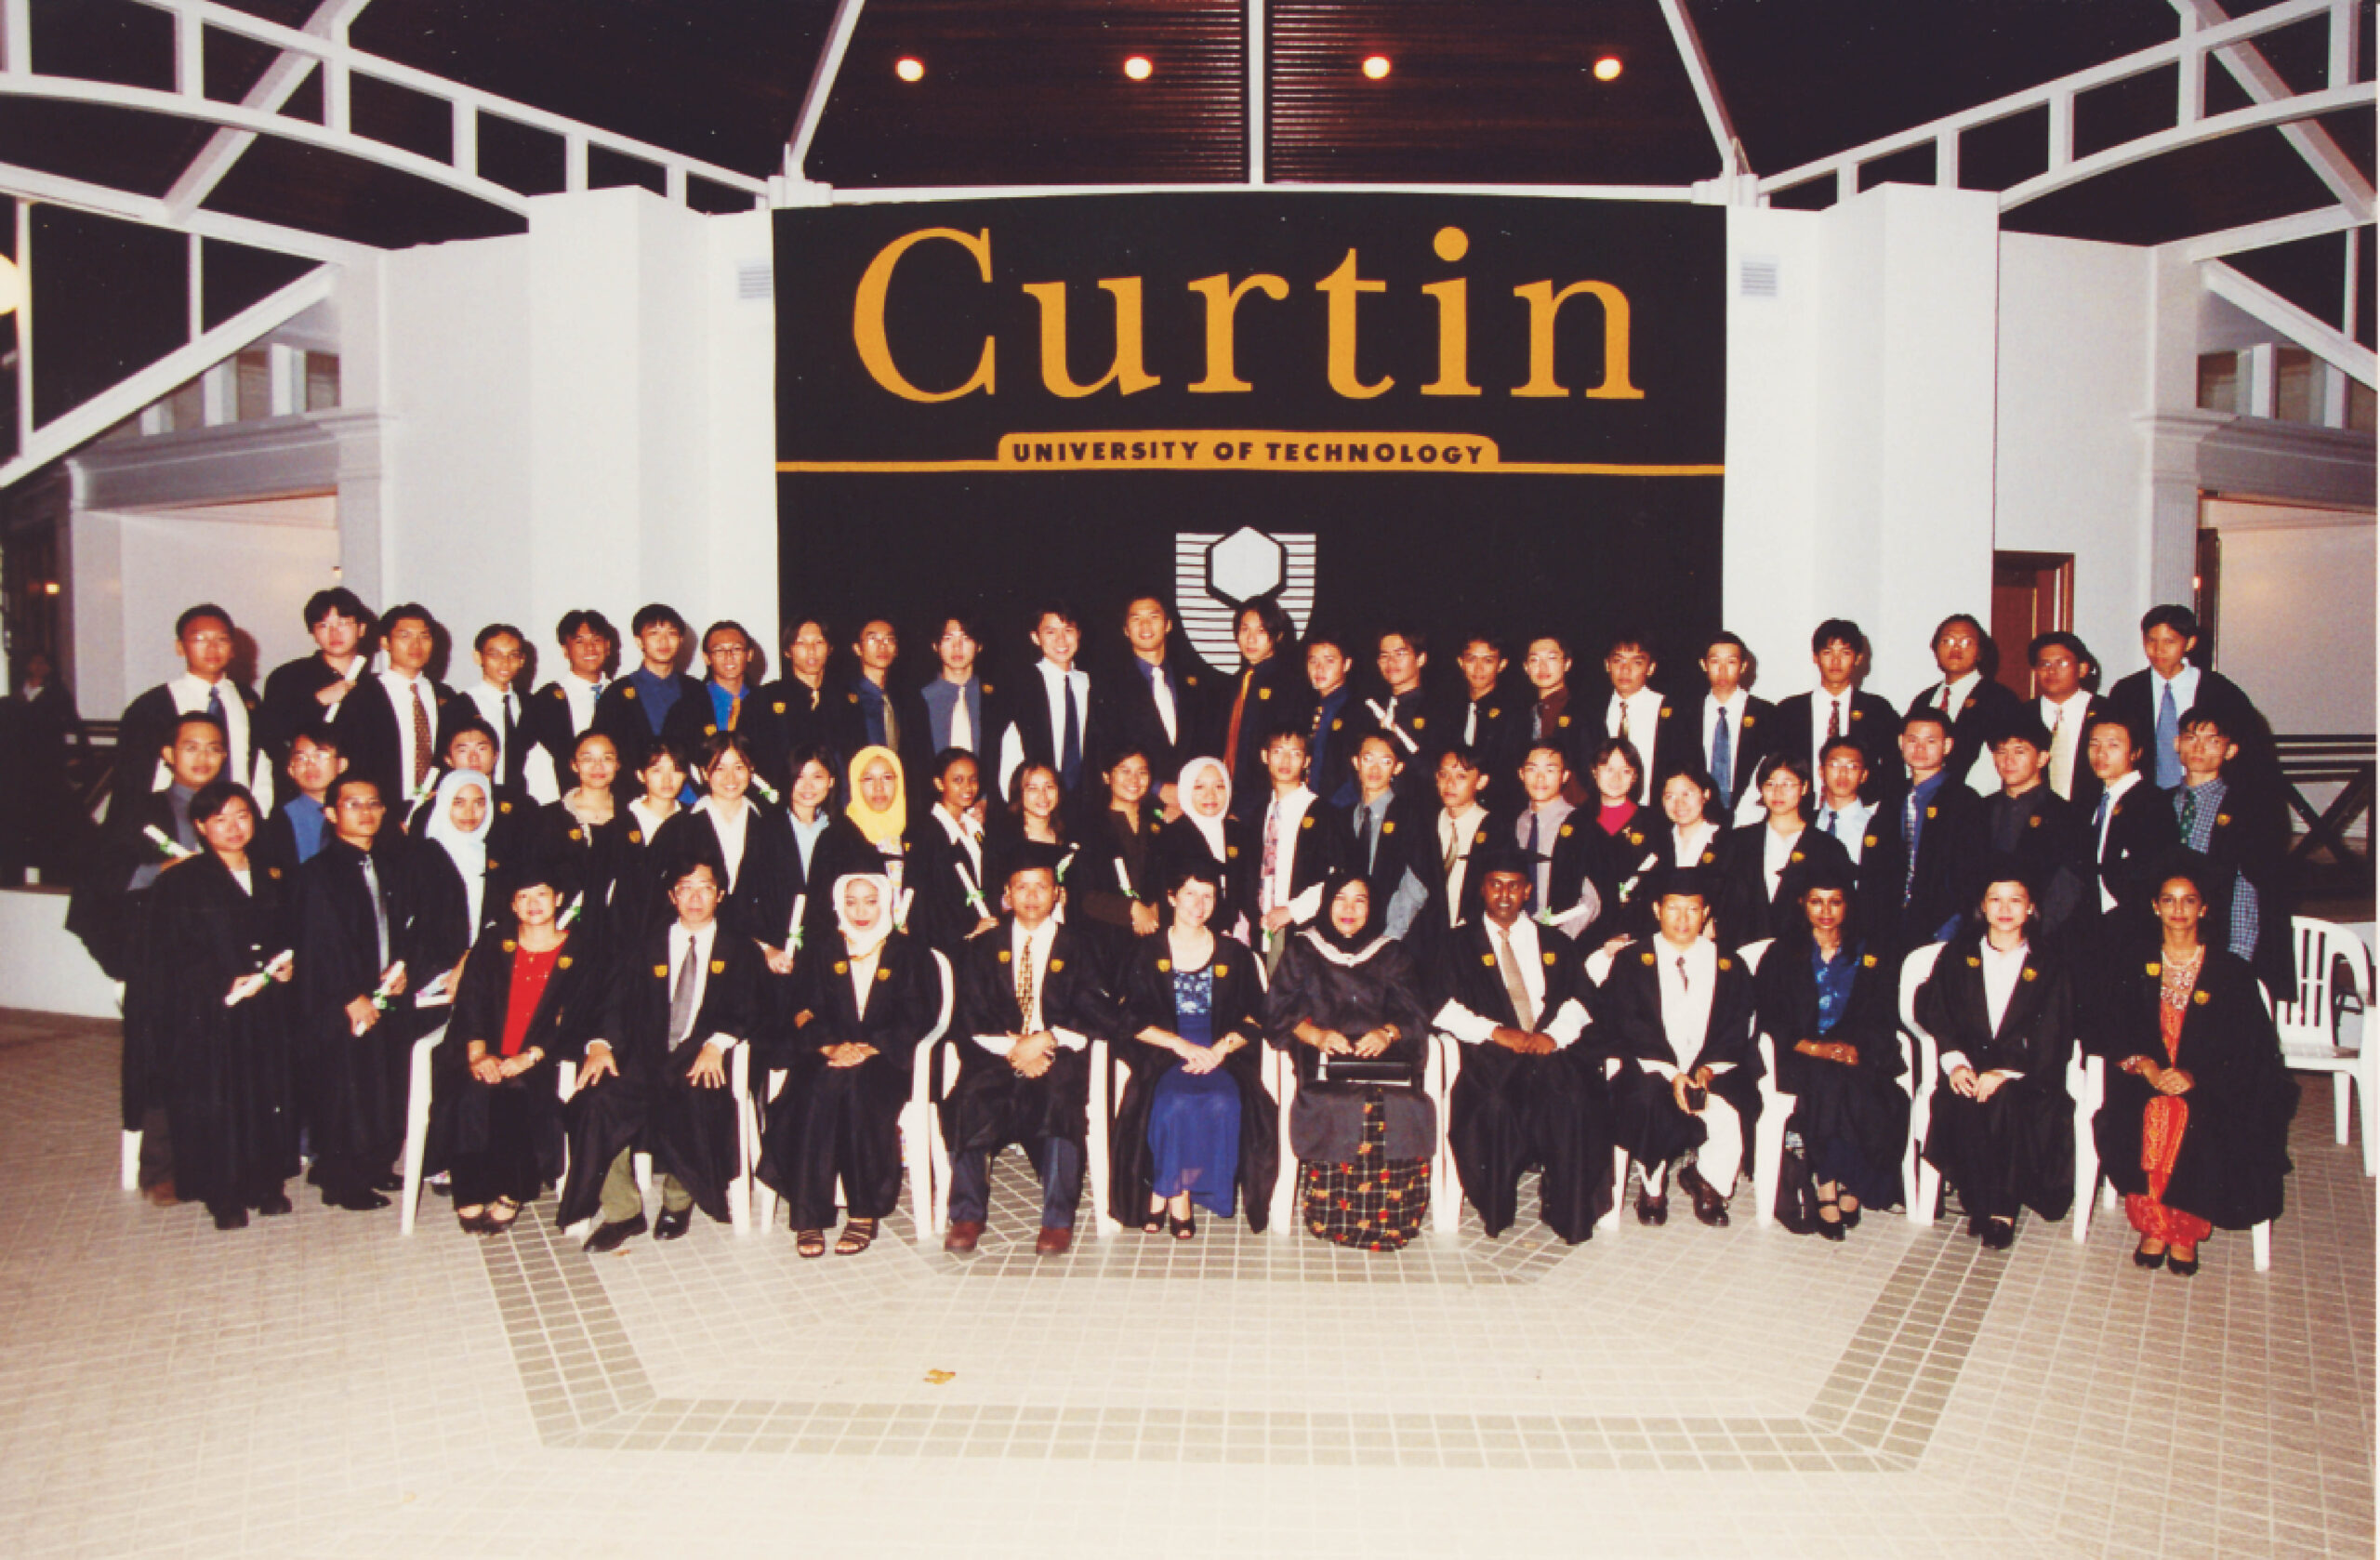 a formal portrait of three rows of student graduates wearing black academic gowns and coloured sashes, holding their graduation certificates. behind them is a large black sign with 'Curtin University of Technology' in yellow.